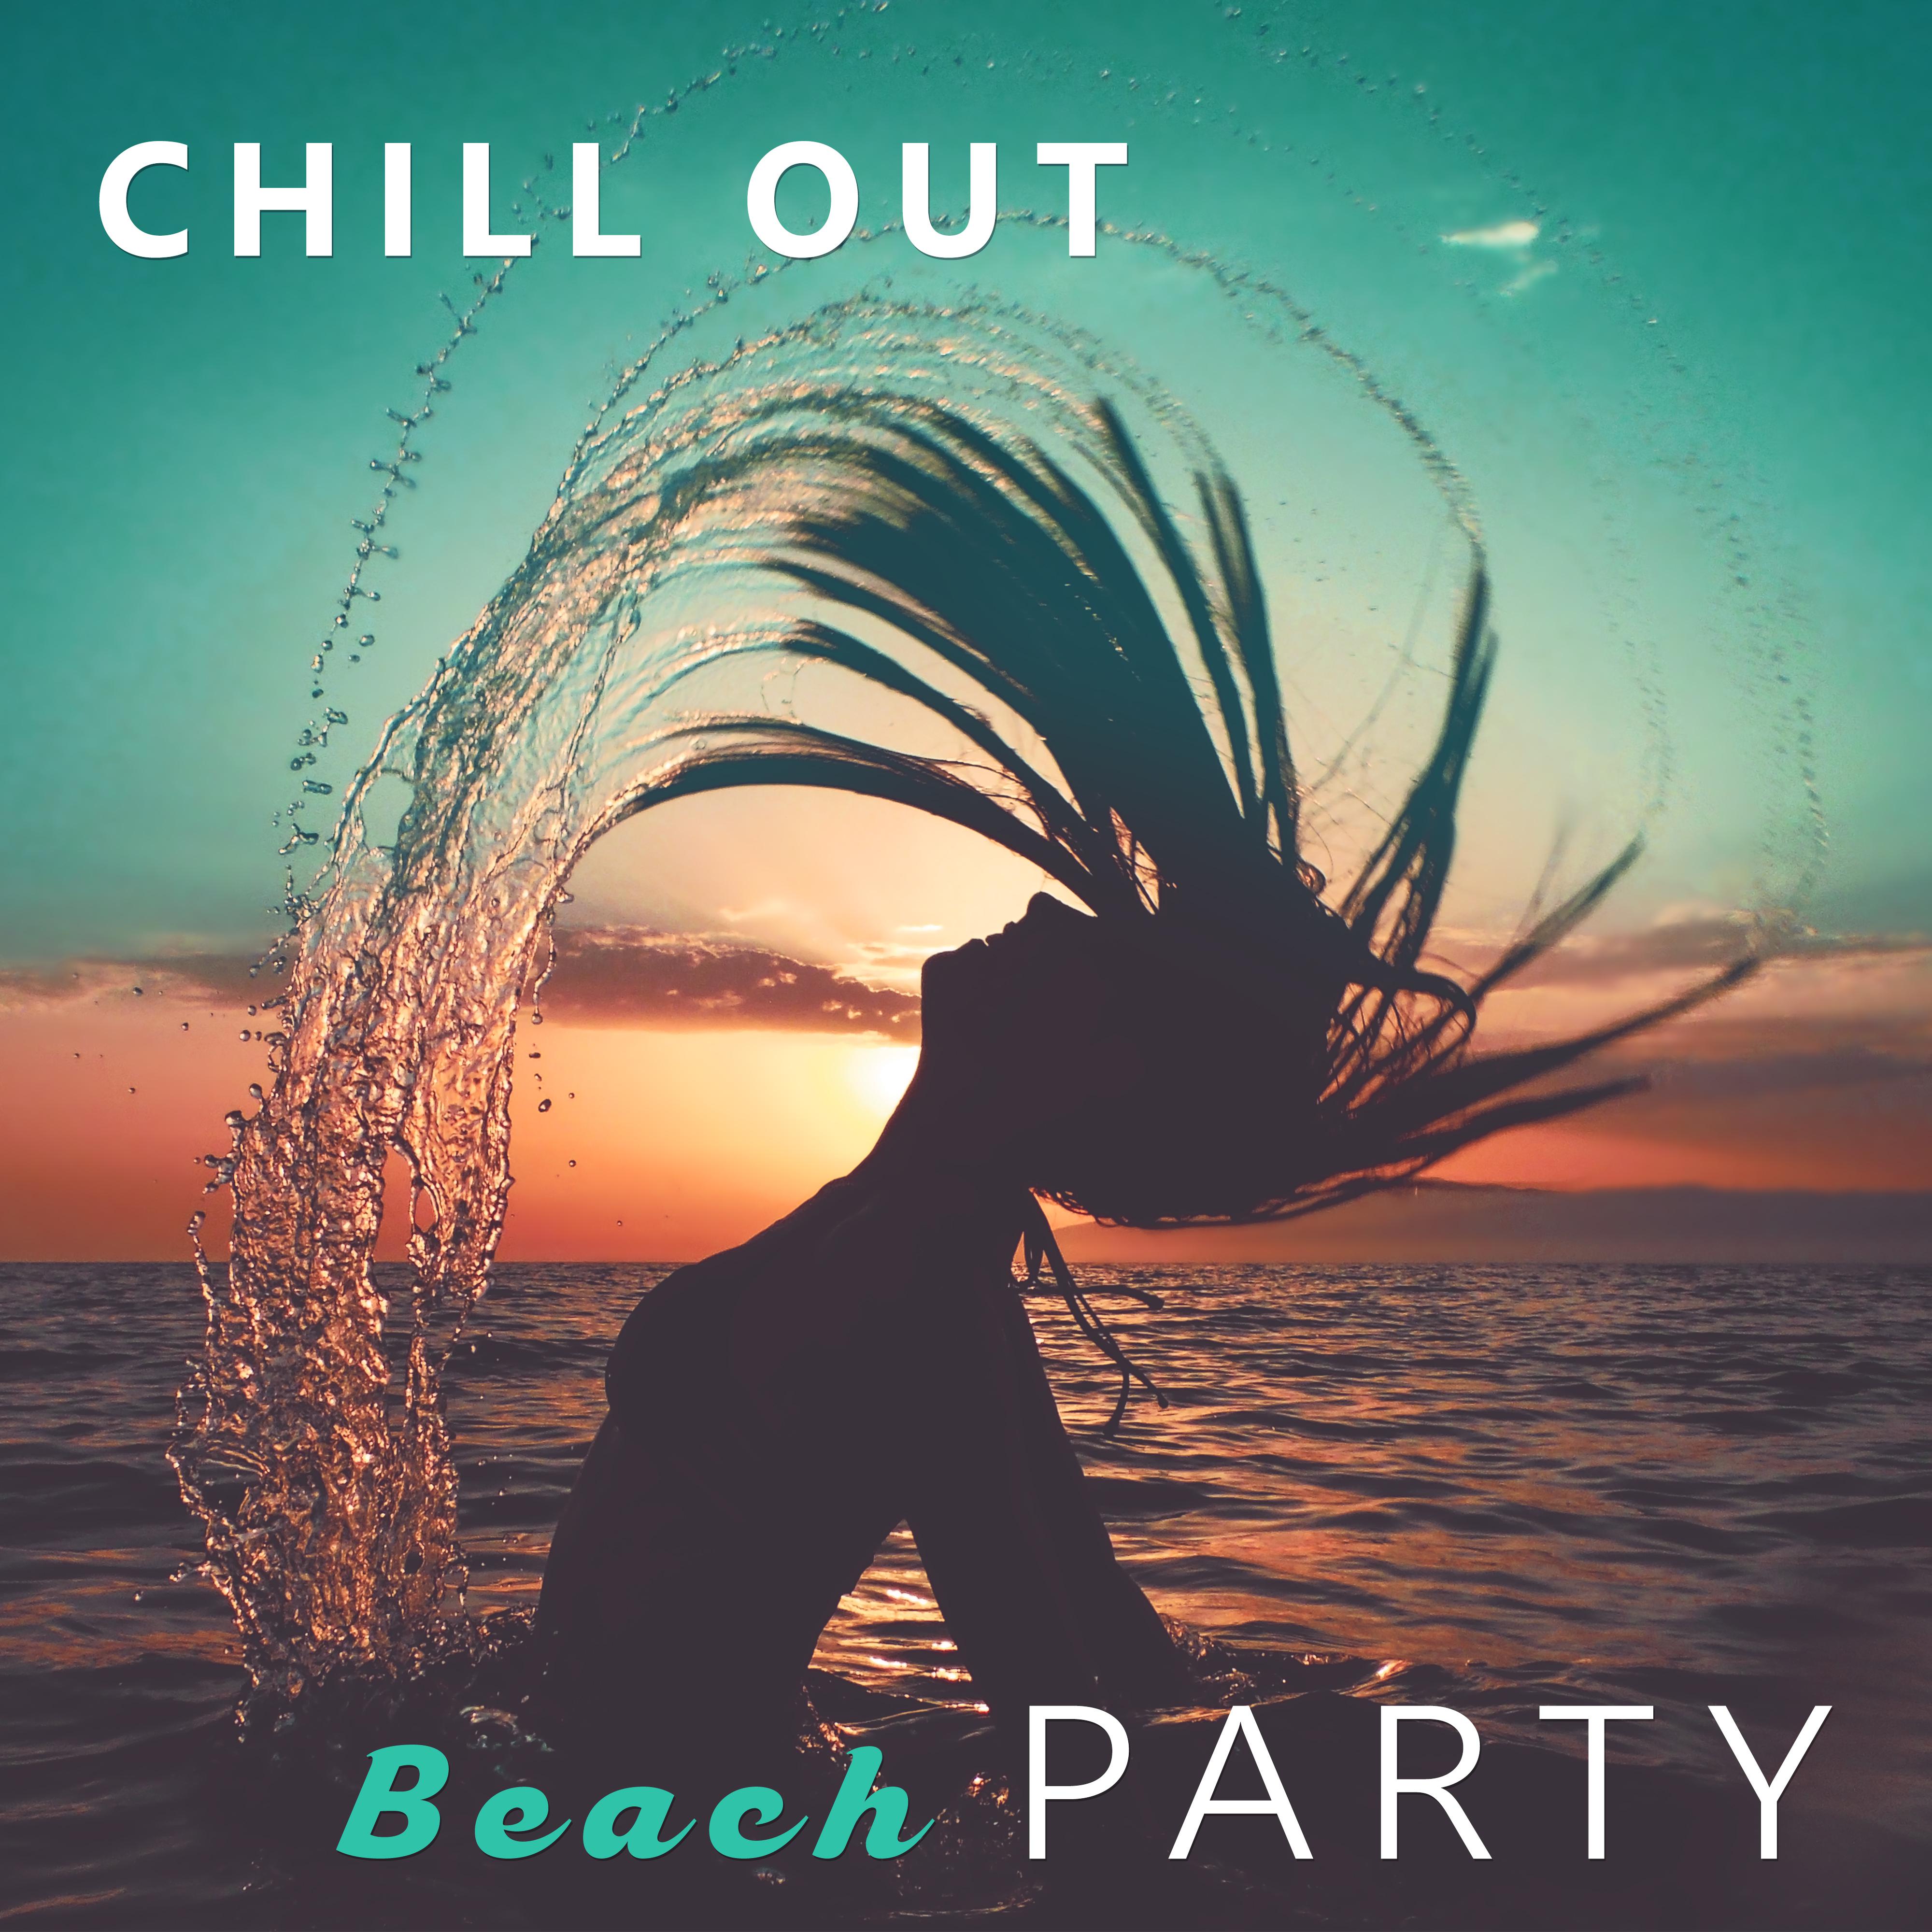 Chill Out Beach Party  Holidays Music, Summer Chillout, Positive Vibrations, Ibiza Chilout Party